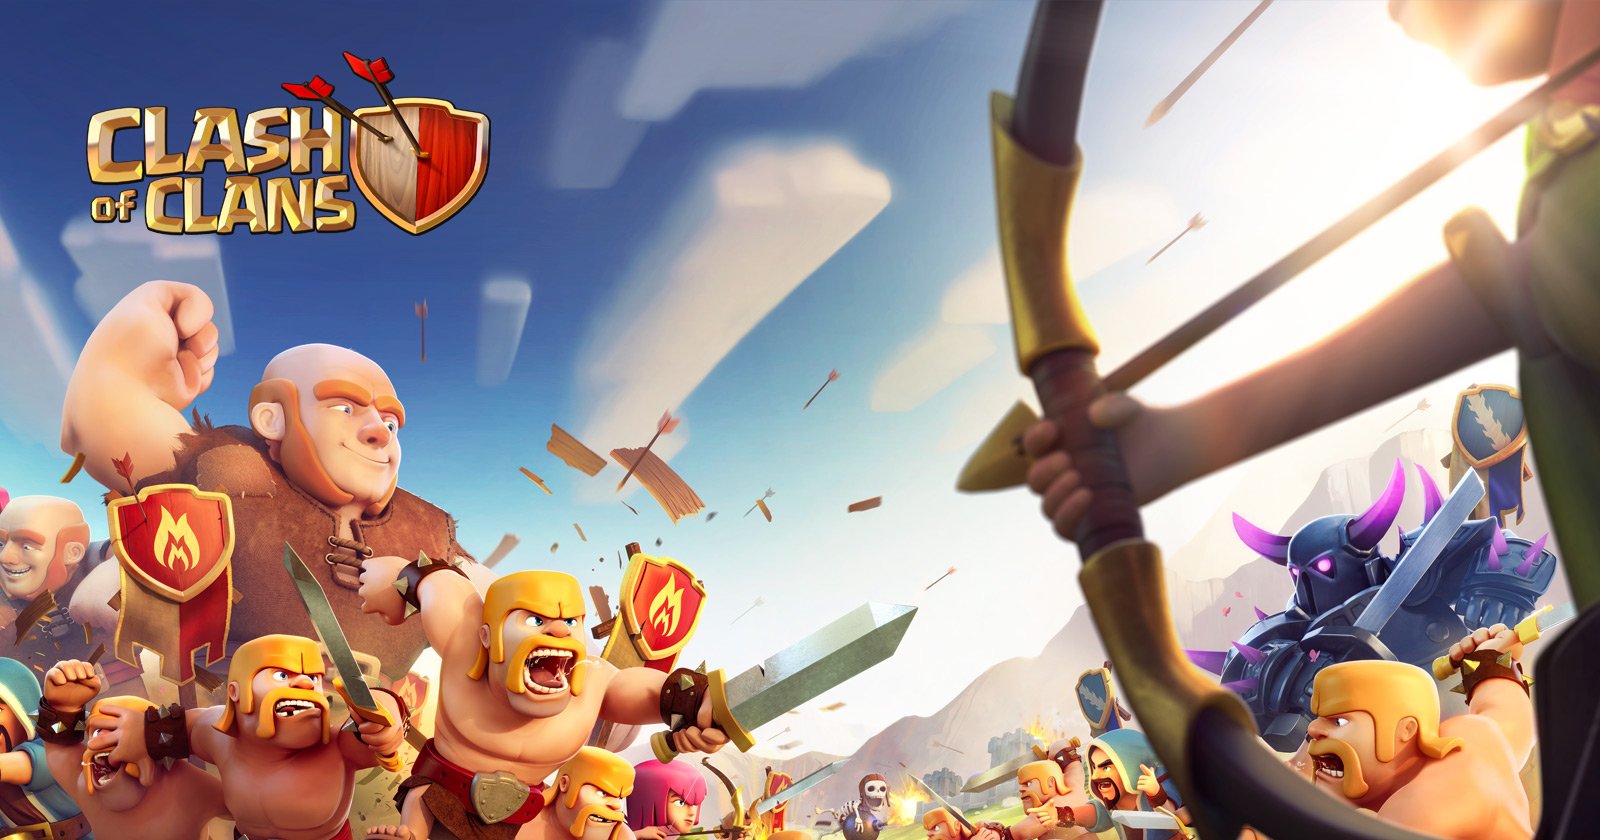 Image of Clash of Clans